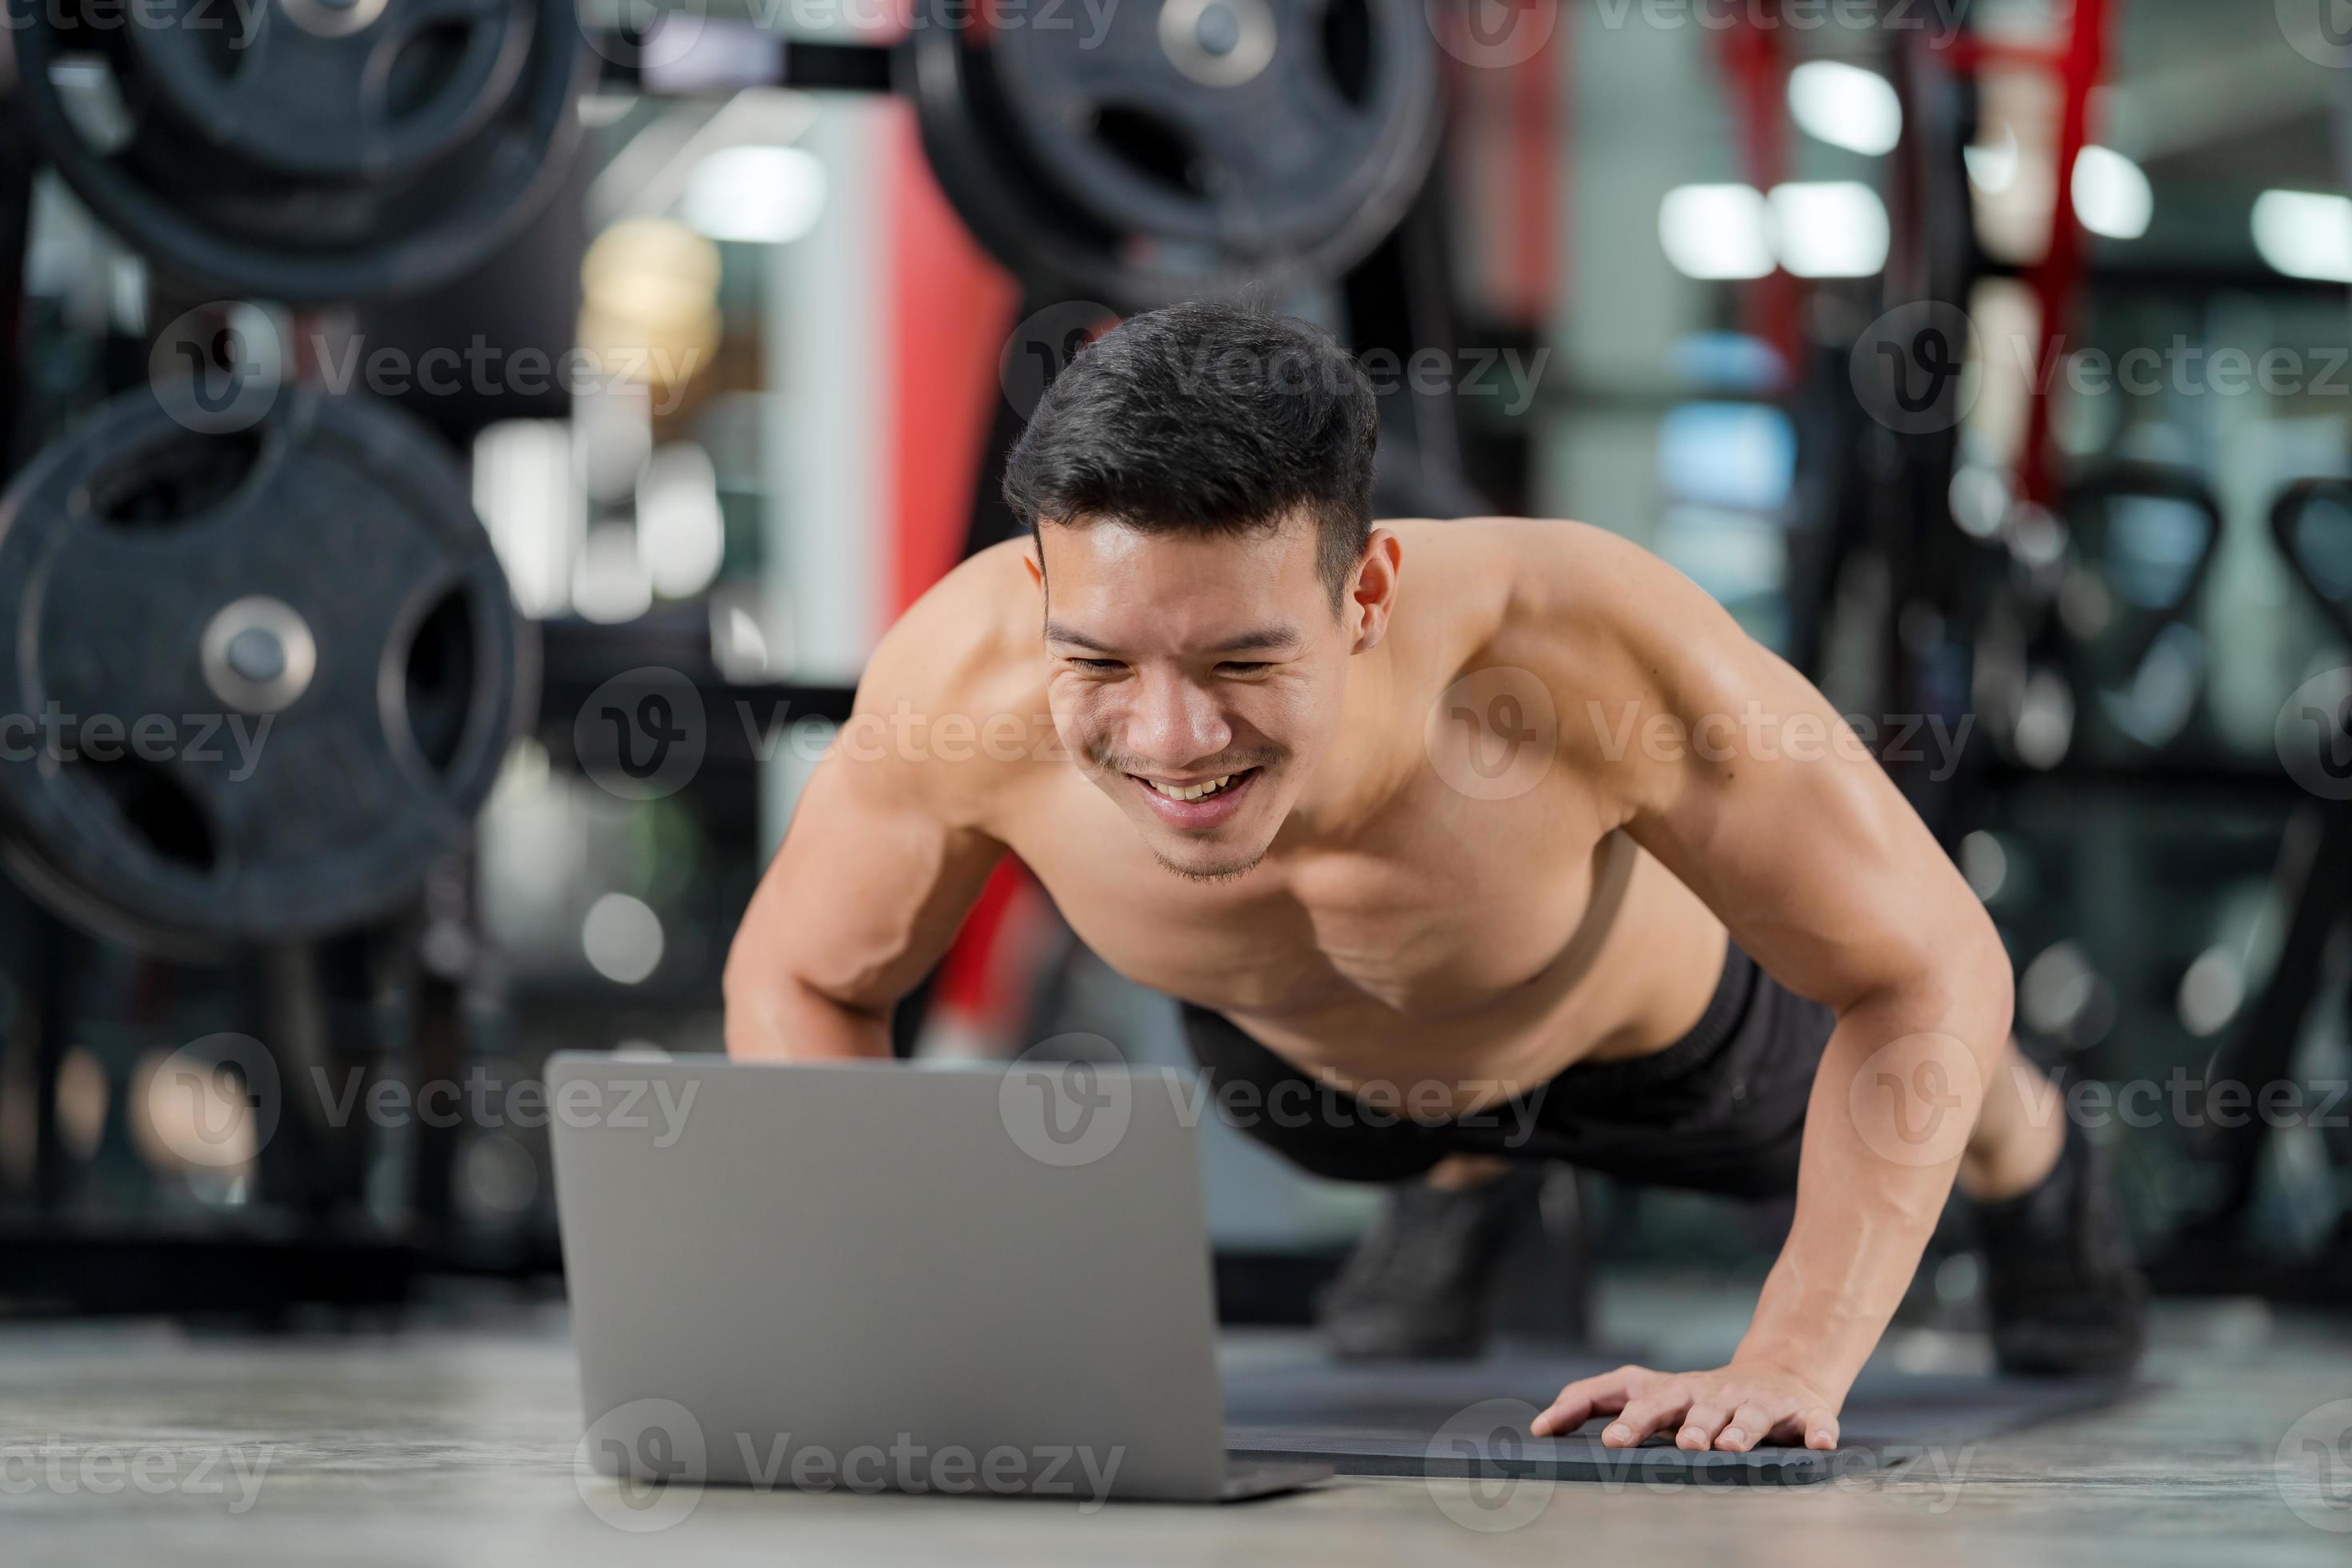 Online training Sport man training doing push ups exercise with laptop in fitness gym 2520767 Photo at Vecteezy